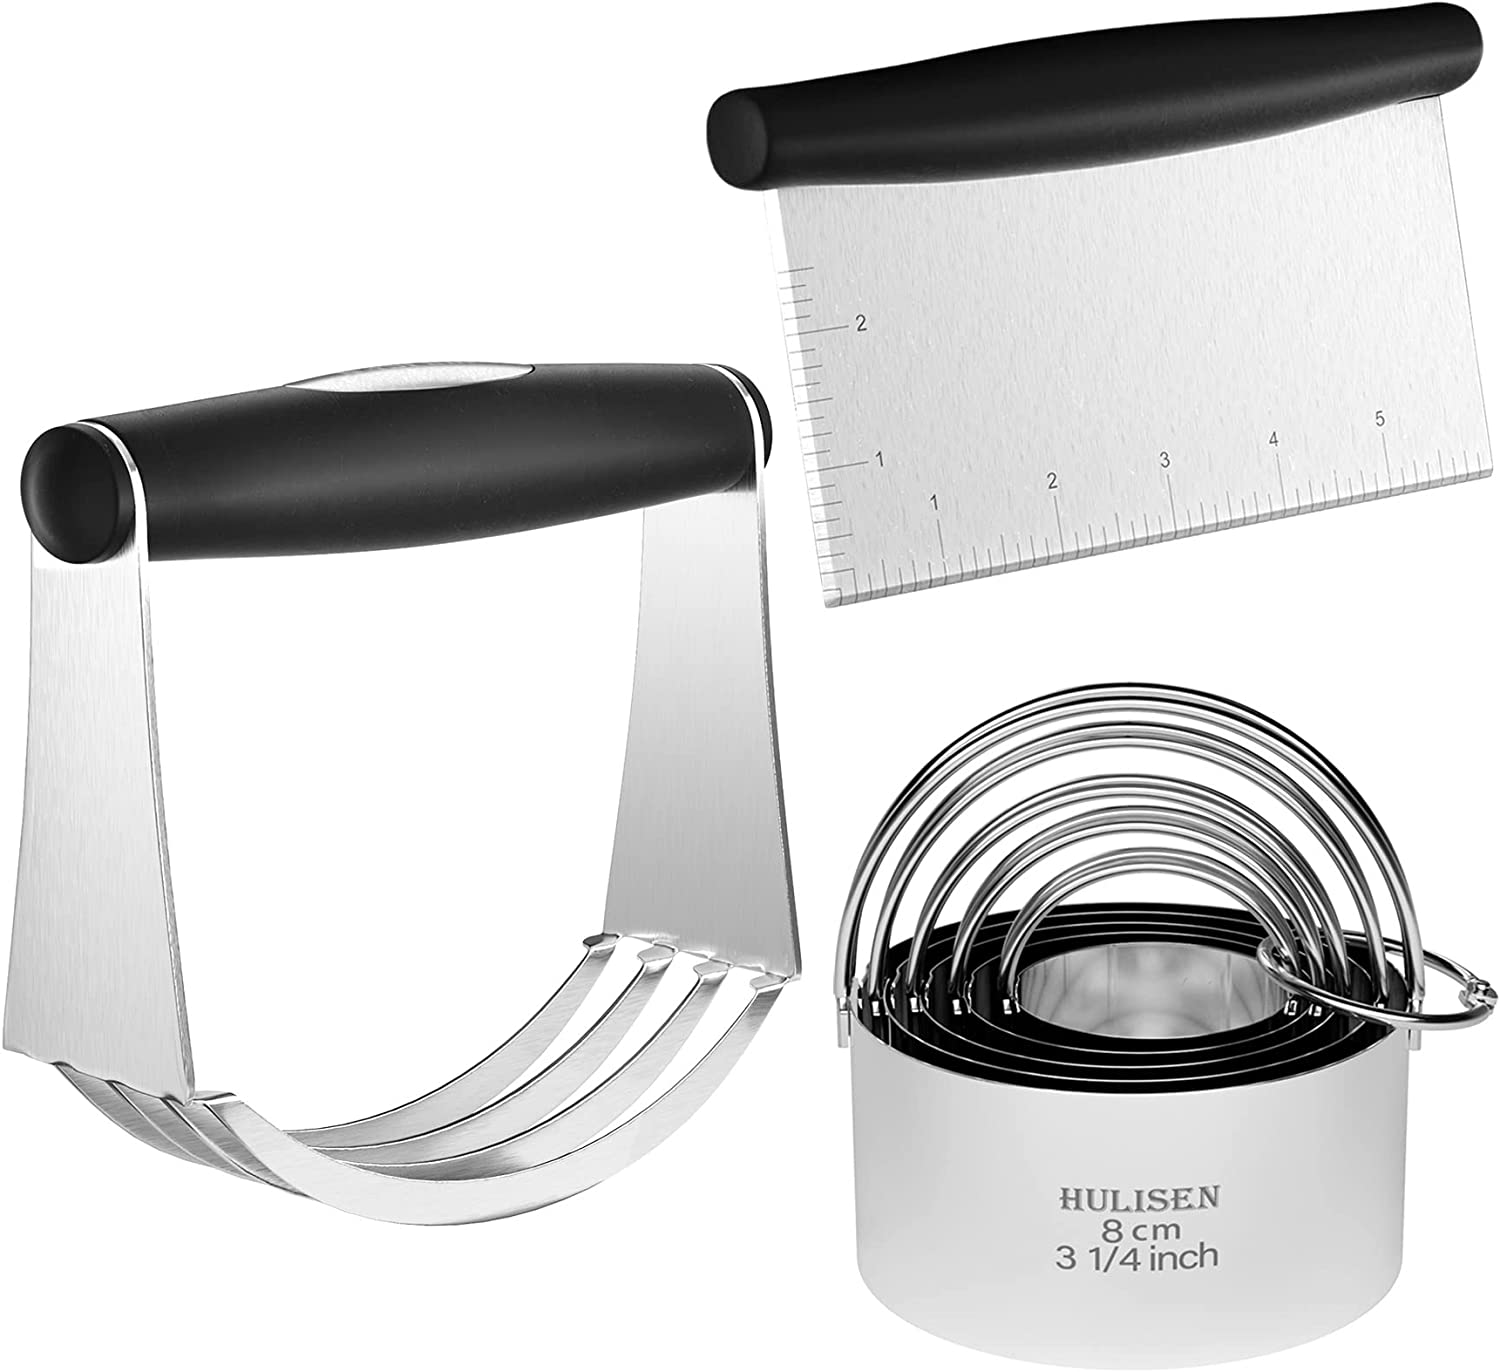 Gifbera Pastry Cutter, Large Pastry Blender with Comfortable Handle & Heavy  Duty Stainless Steel Blades, Black